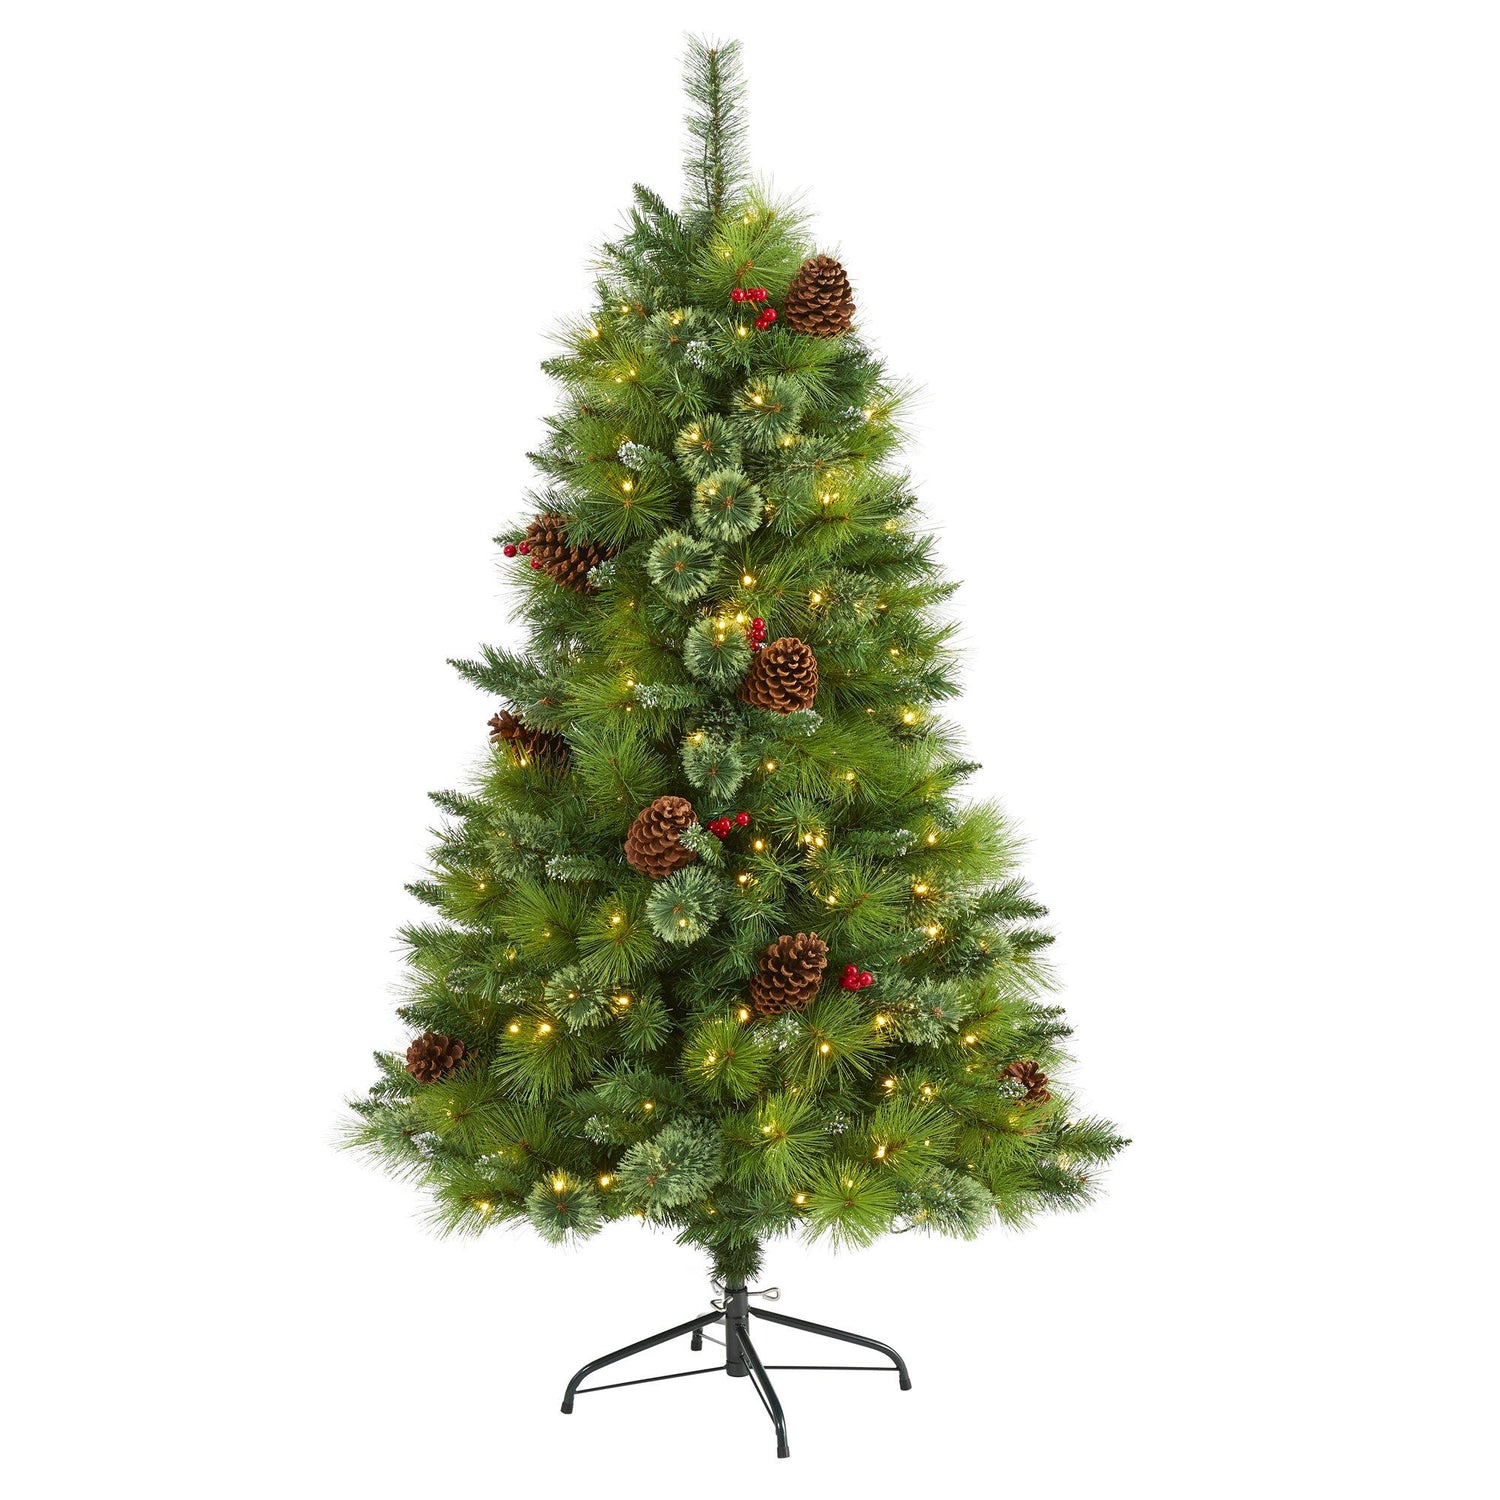 5’ Montana Mixed Pine Artificial Christmas Tree with Pine Cones, Berries and 250 Clear LED Lights